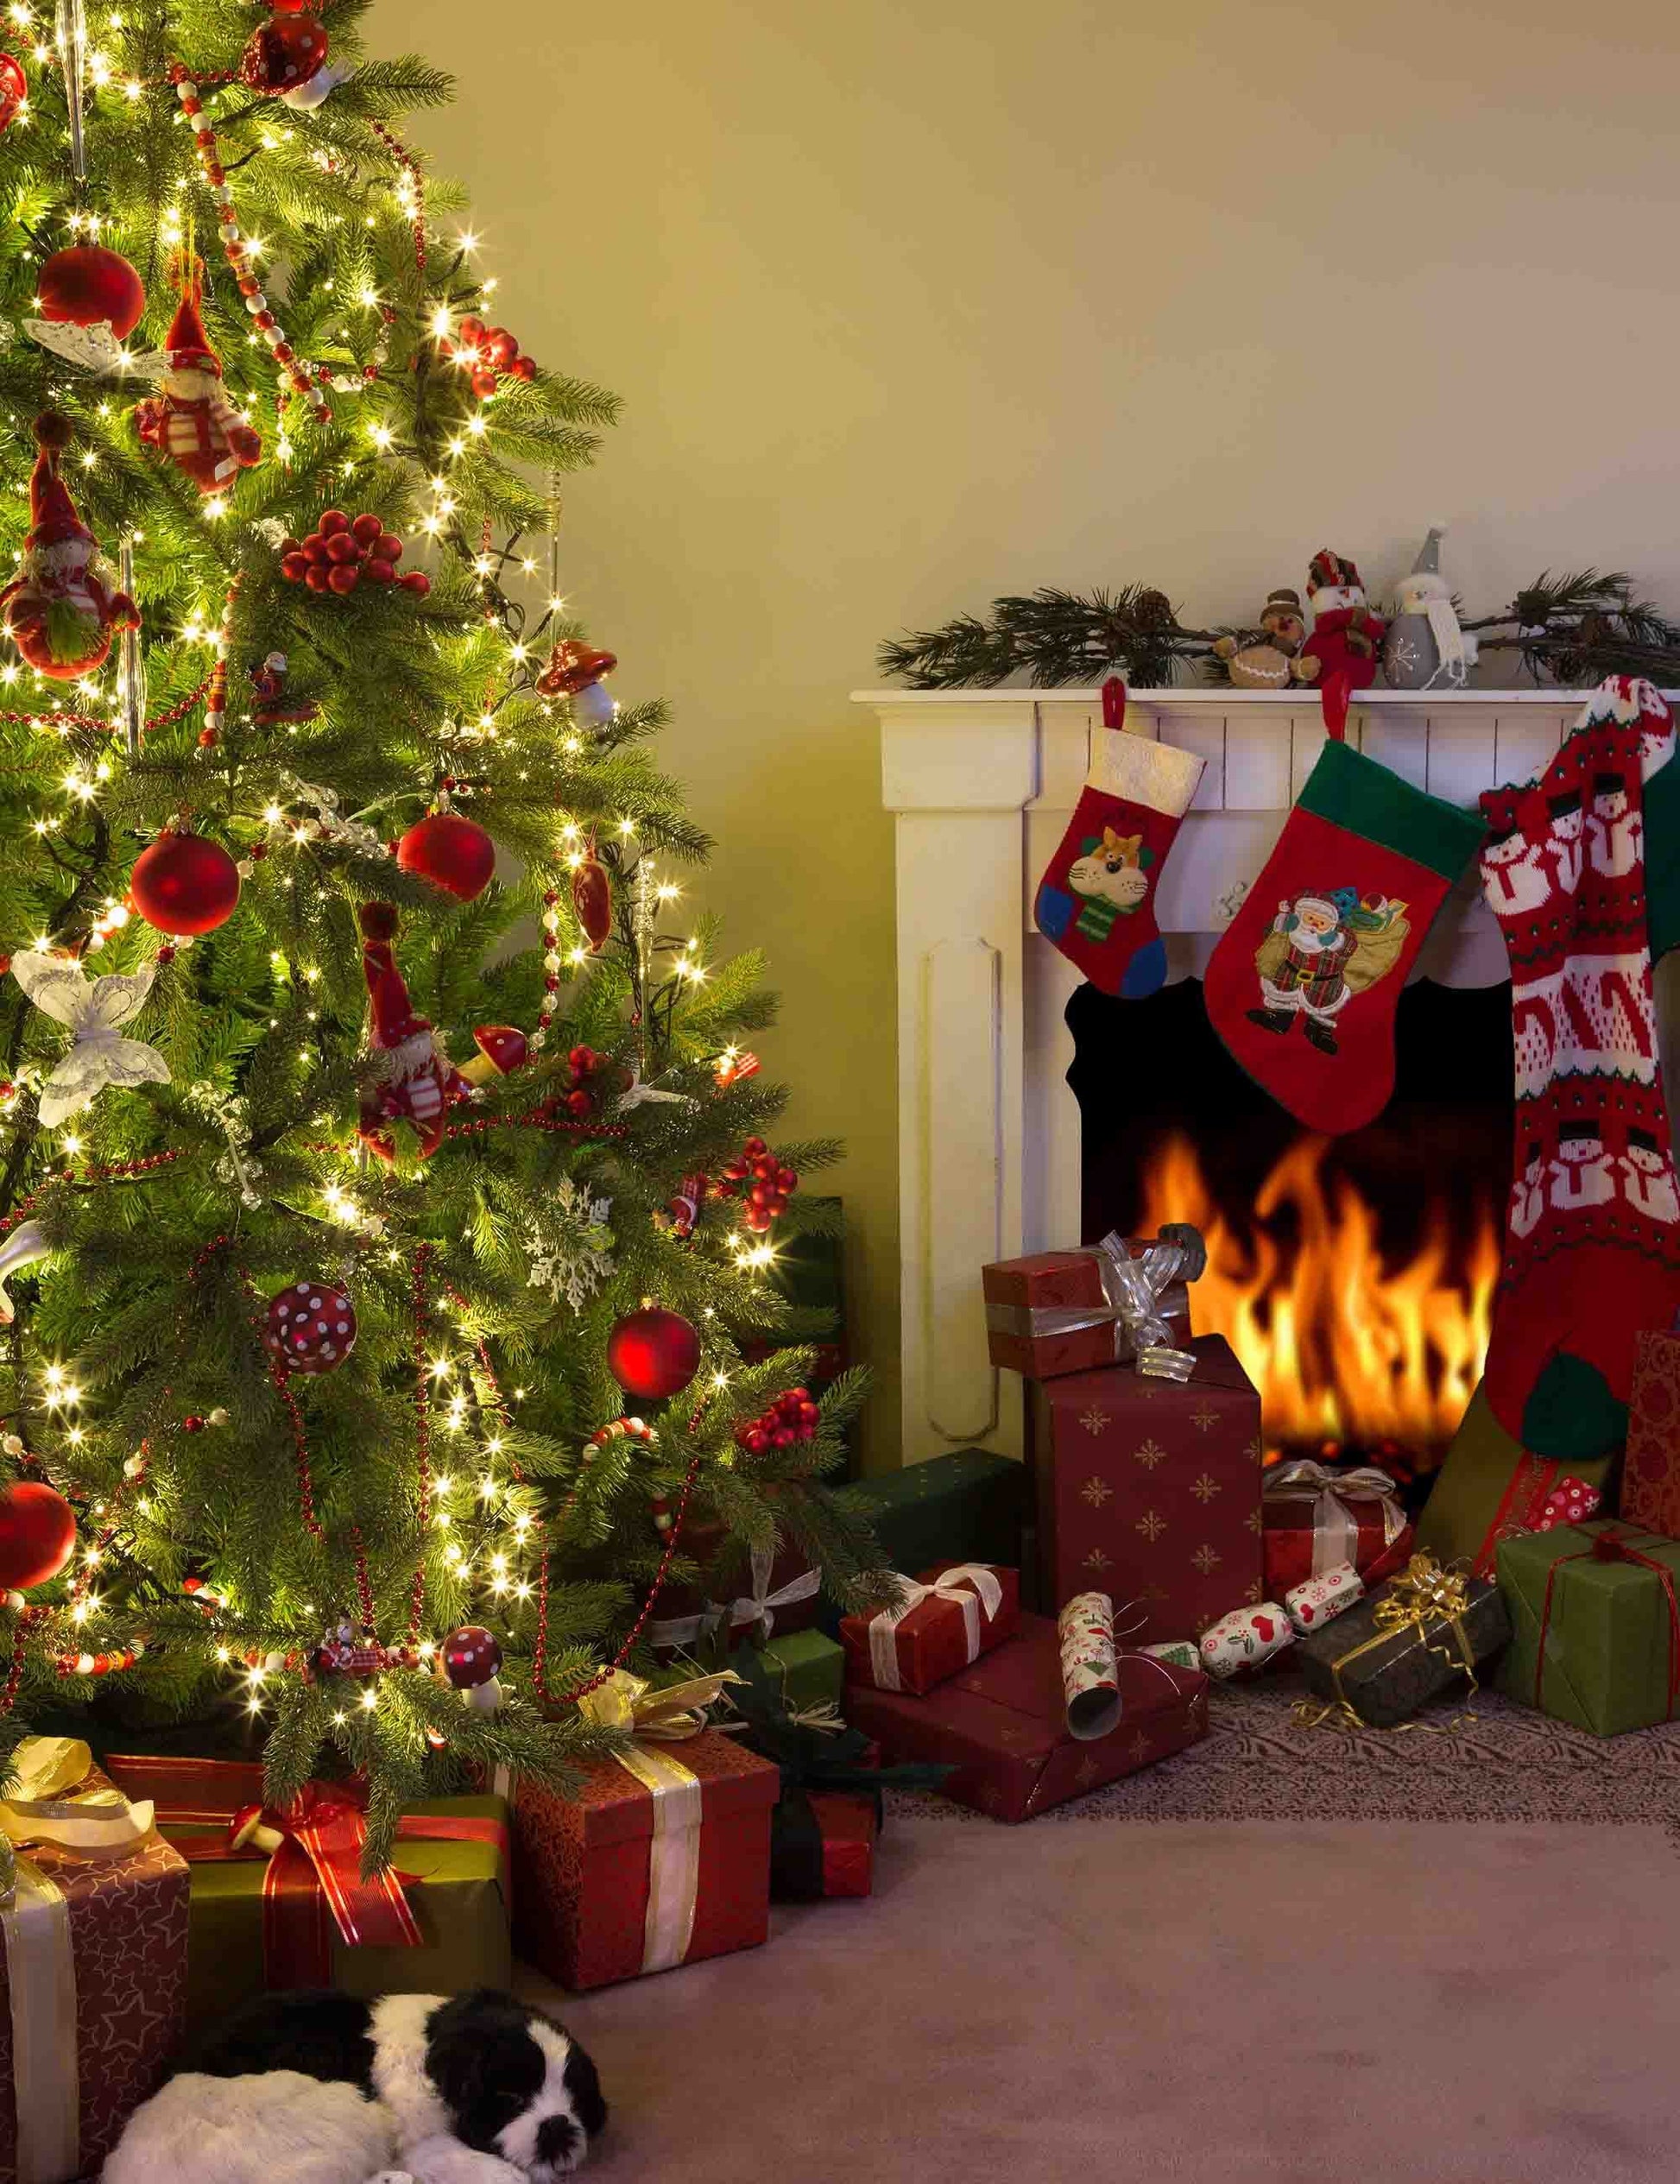 Christmas Tree With Gift And Fireplace For Holiday Photography Backdrop Shopbackdrop